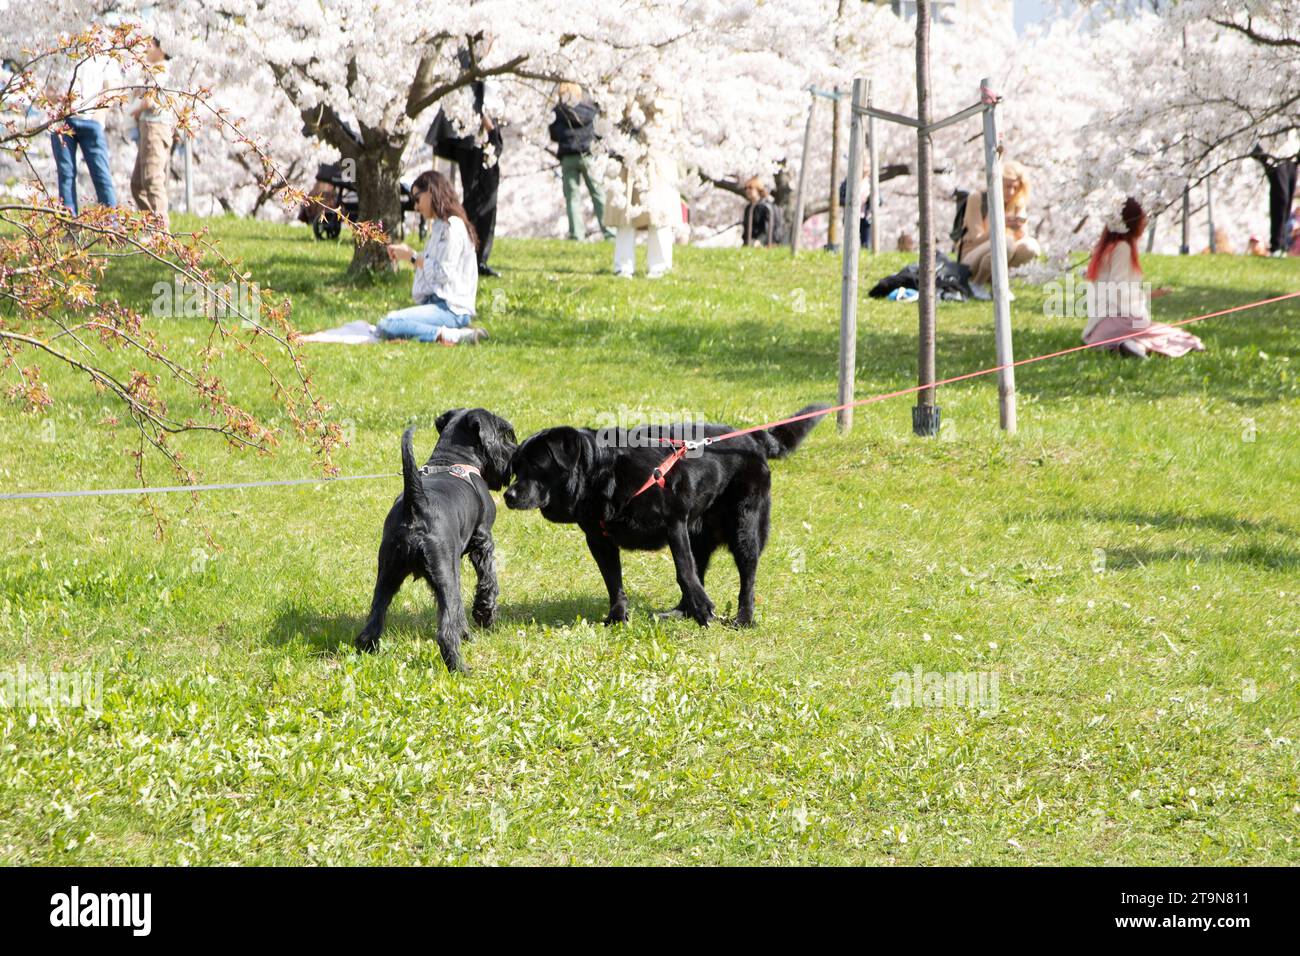 photography, dog walking, pet, active lifestyle, public park, togetherness, person, animal, outdoor, lifestyle, weekend activities, purebred dog, look Stock Photo